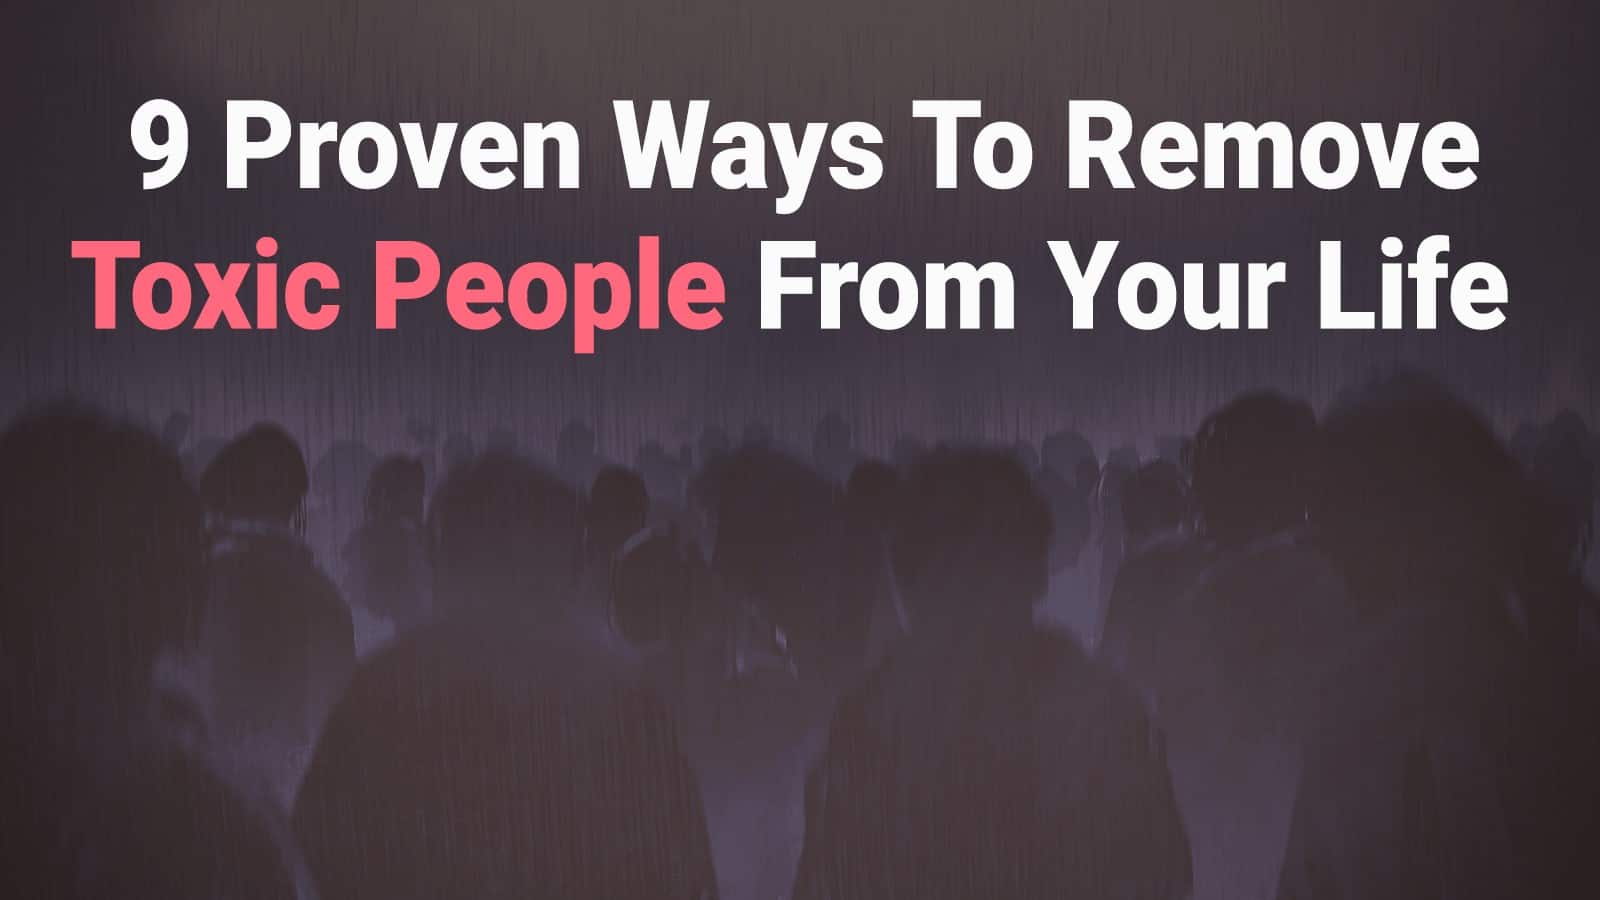 9 Proven Ways To Remove Toxic People From Your Life